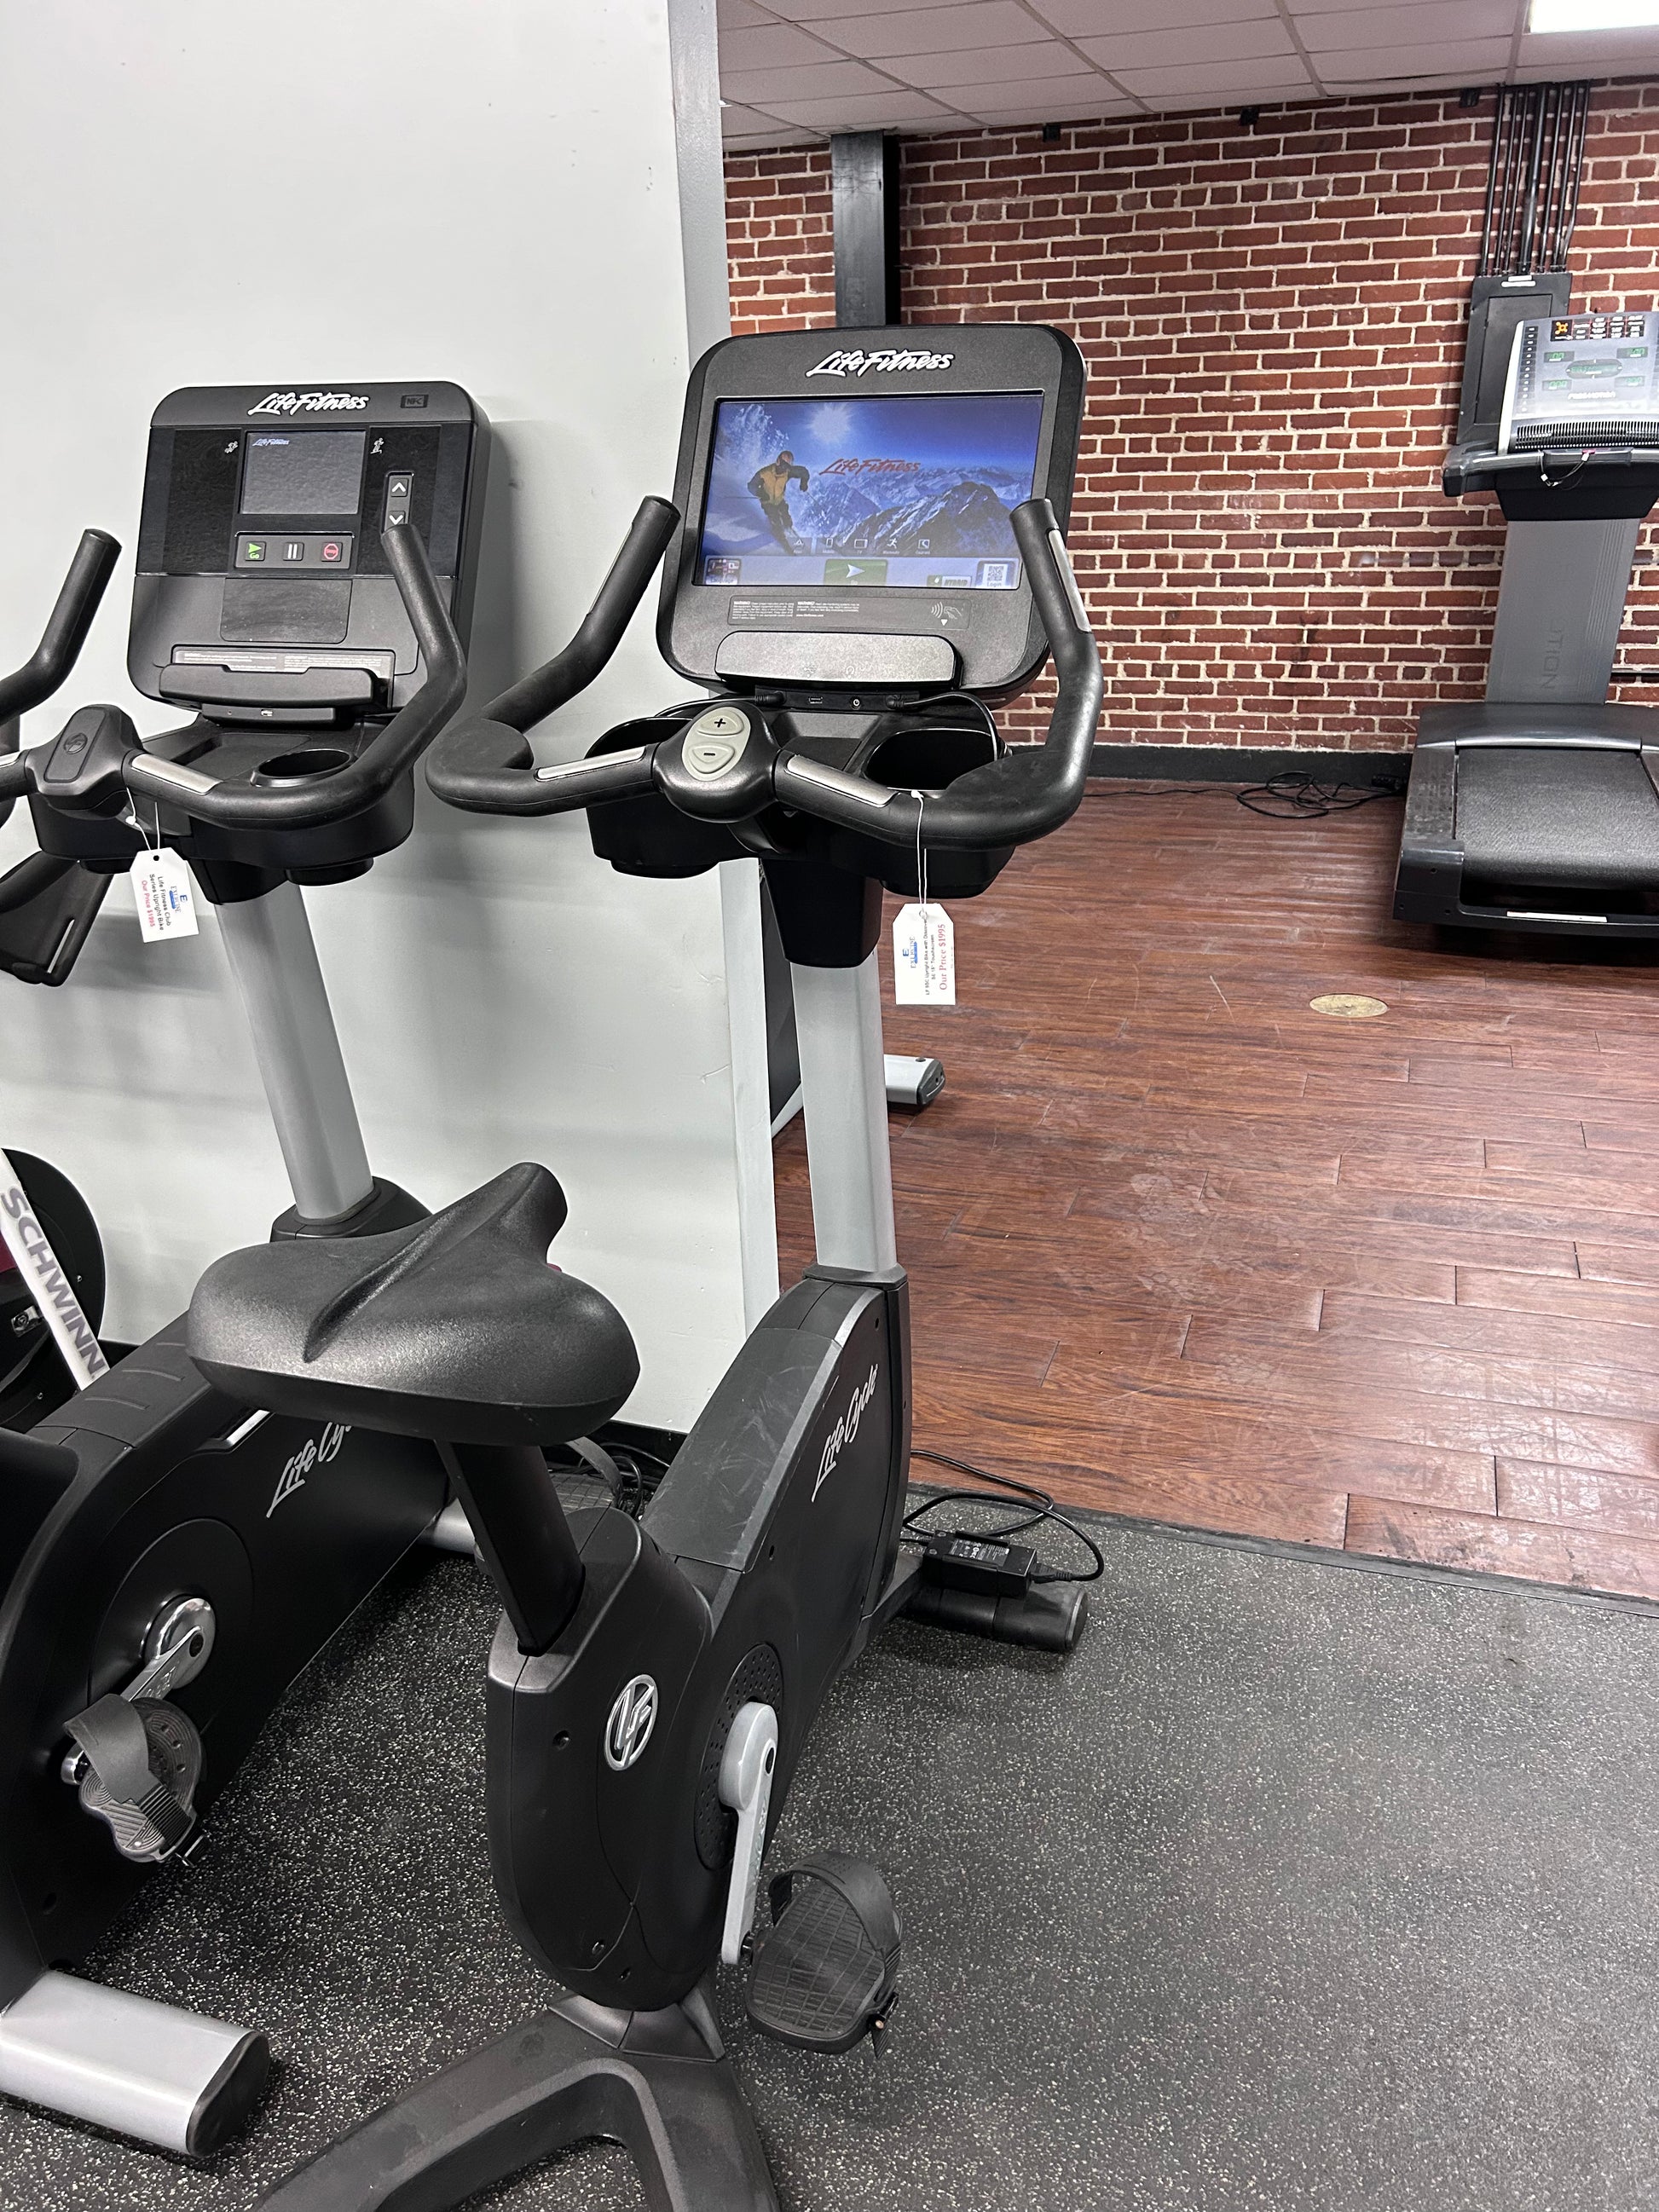 Pre-Owned Life Fitness Upright Bike 9SC w/ discover SE 15" Touchscreen - ExerciseUnlimited